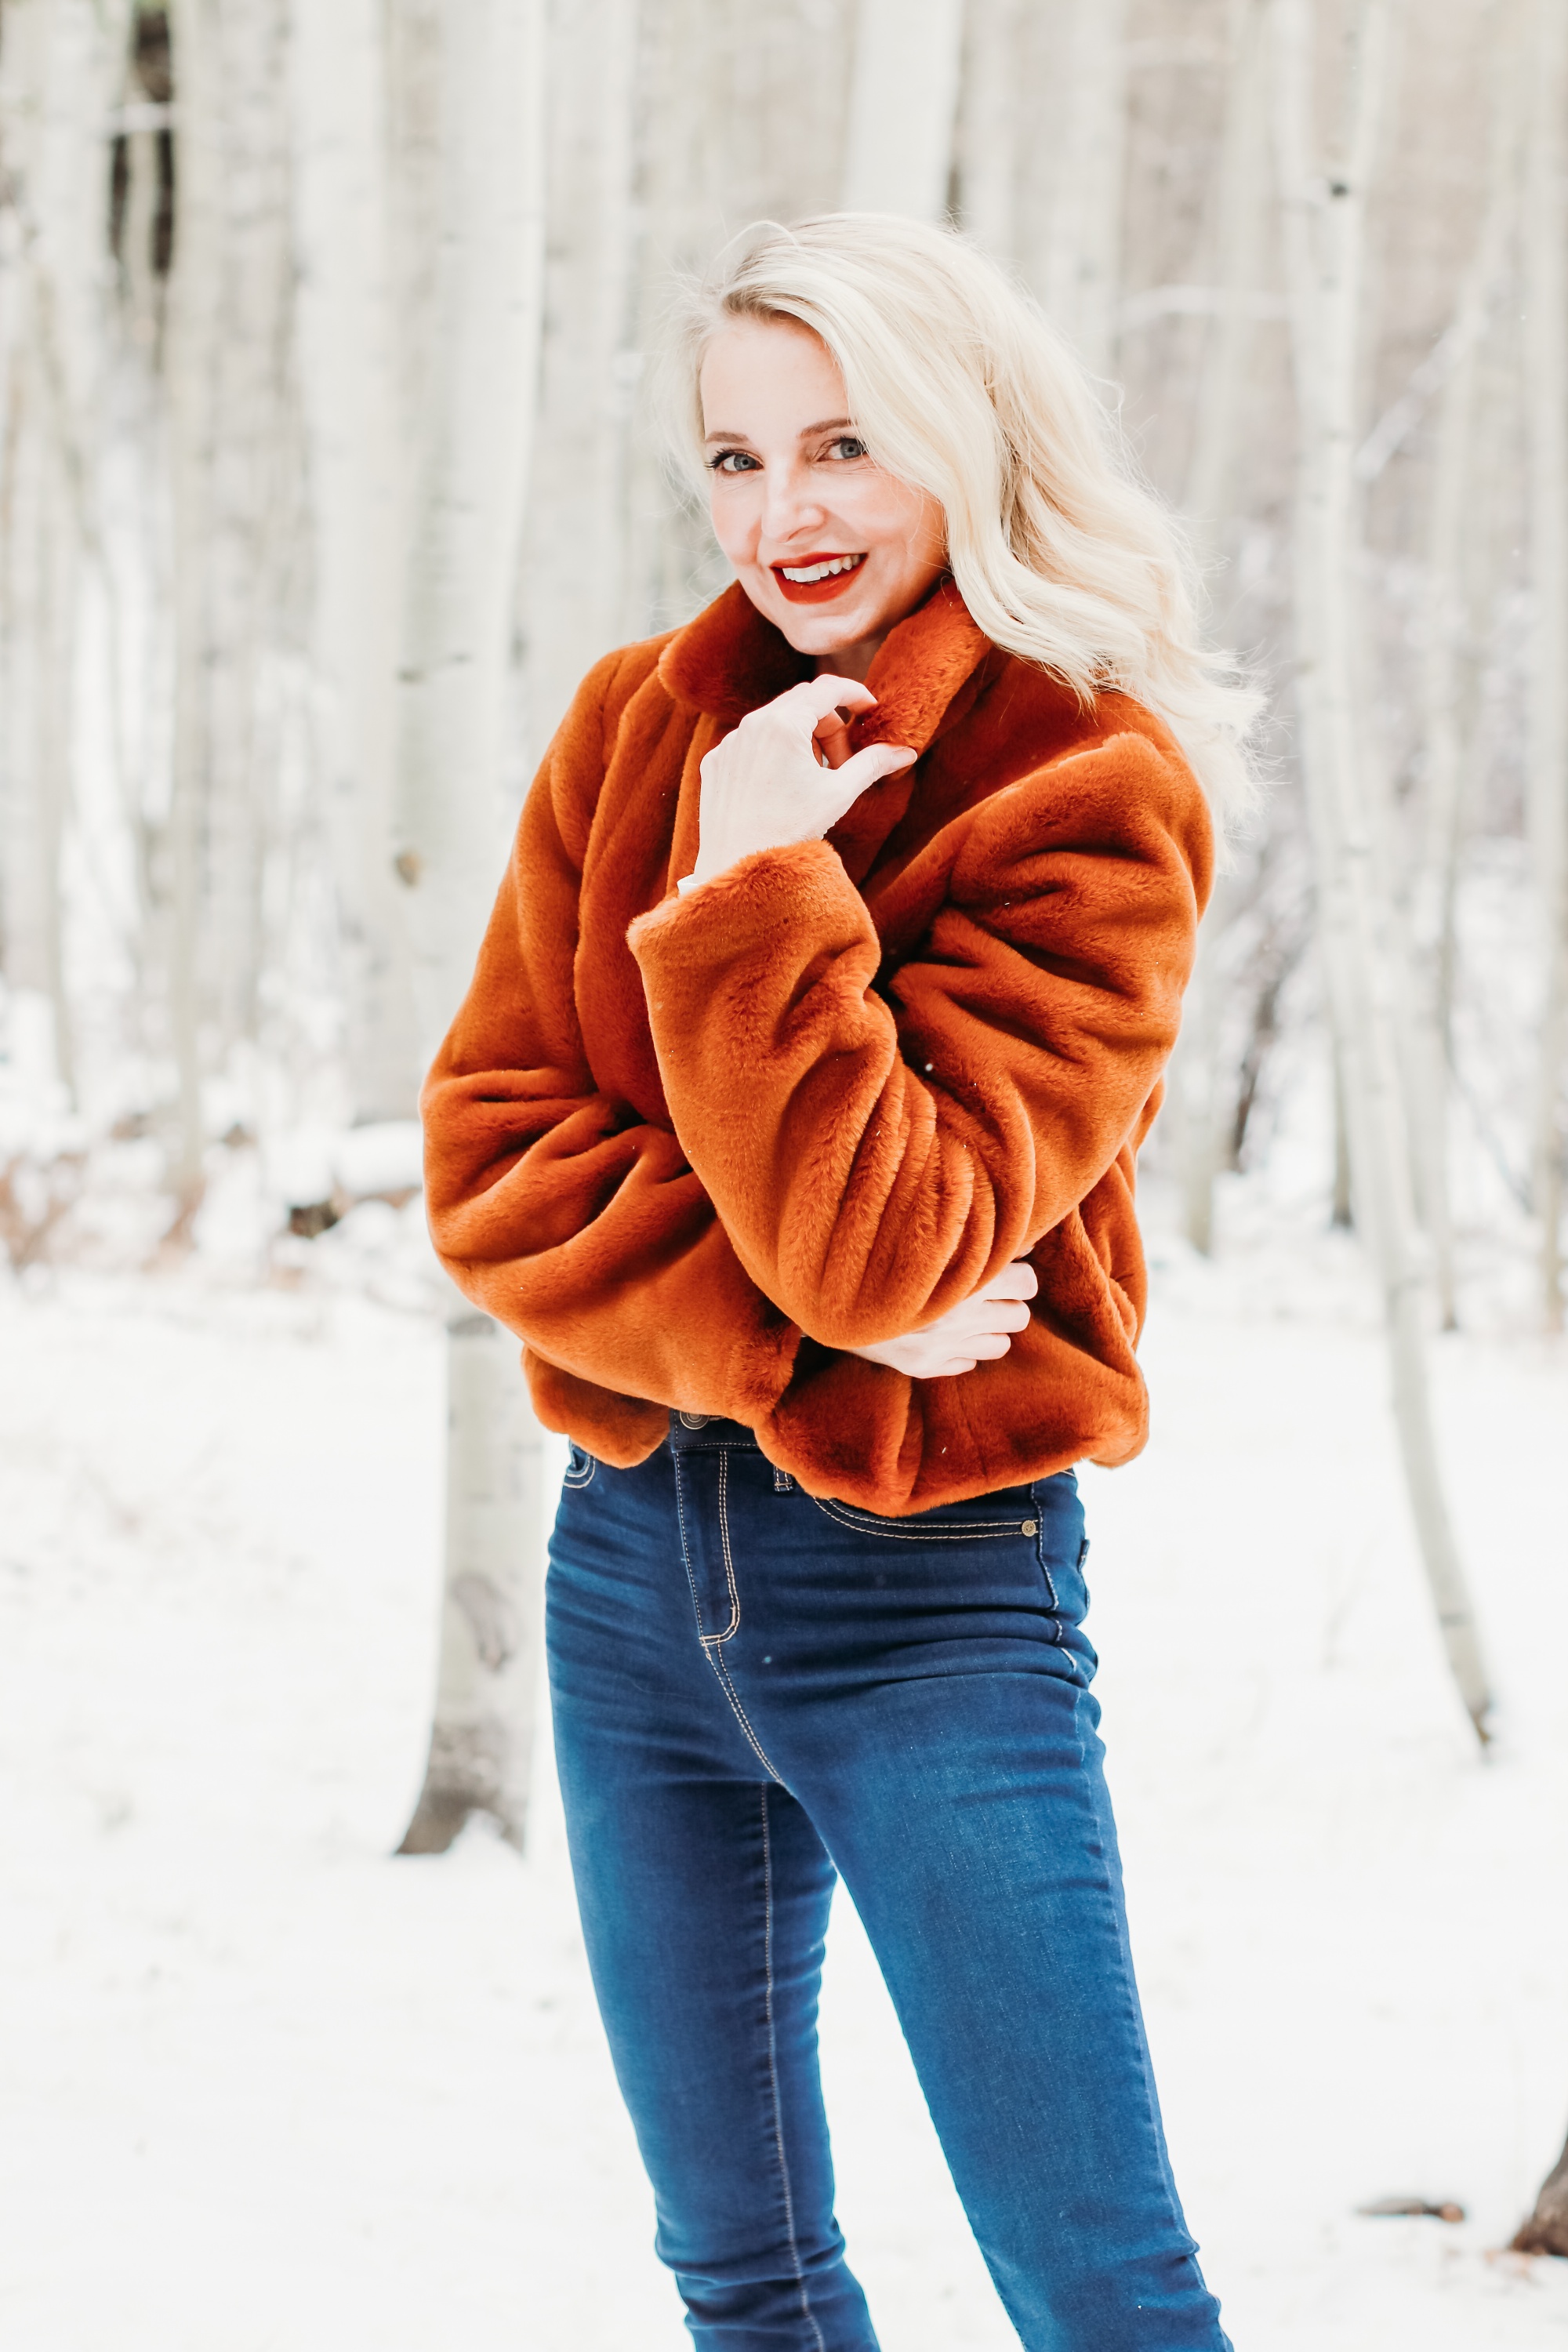 How to Wear the Faux Fur Coat this Winter